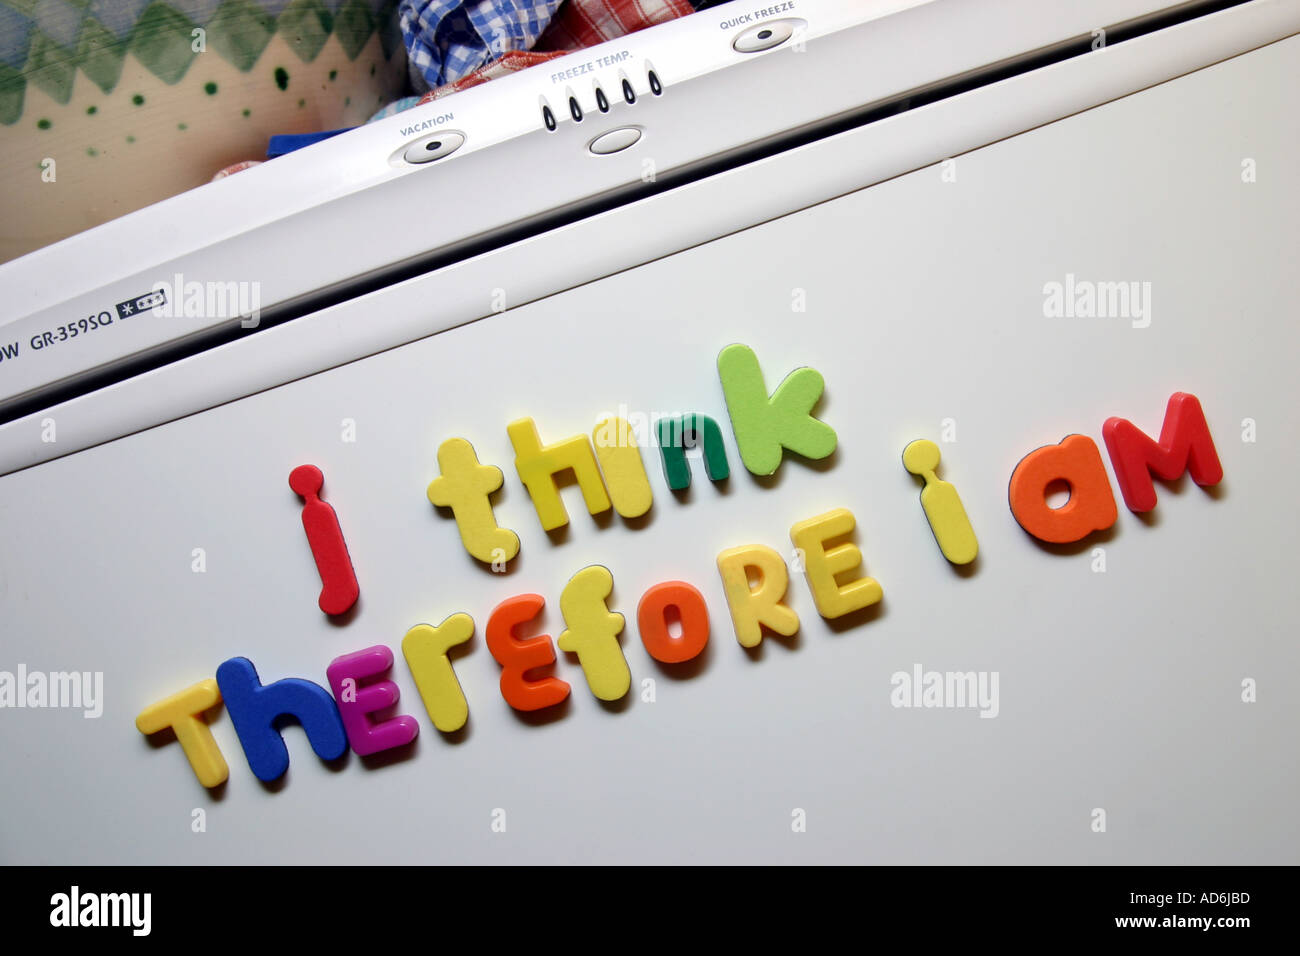 Descartes famous quote I think therefore I am written in fridge magnets on a refrigerator door Stock Photo